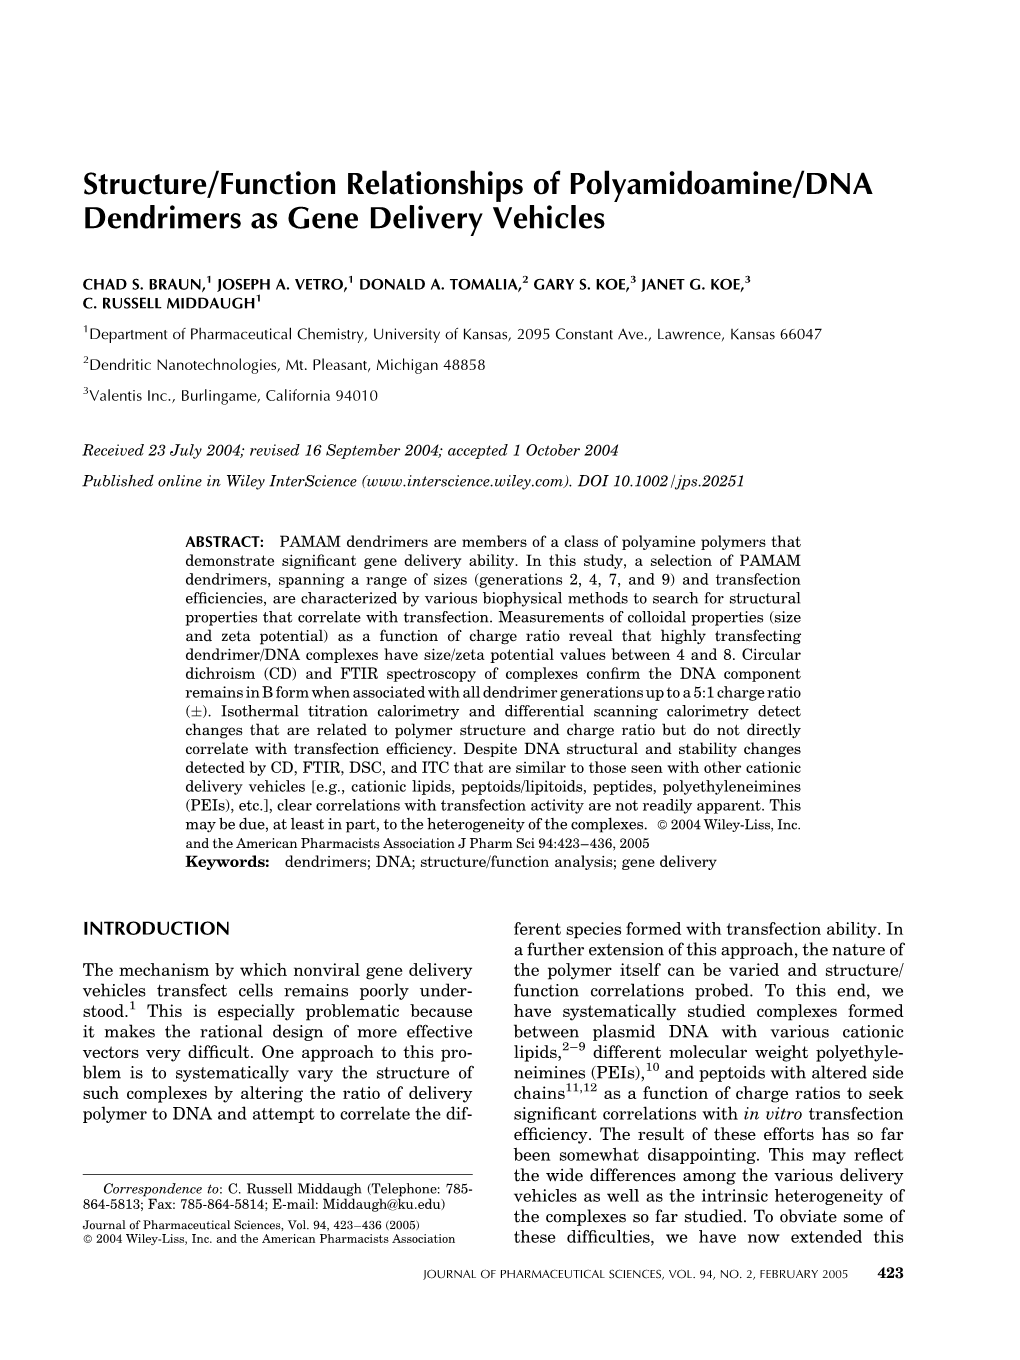 Structure/Function Relationships of Polyamidoamine/DNA Dendrimers As Gene Delivery Vehicles